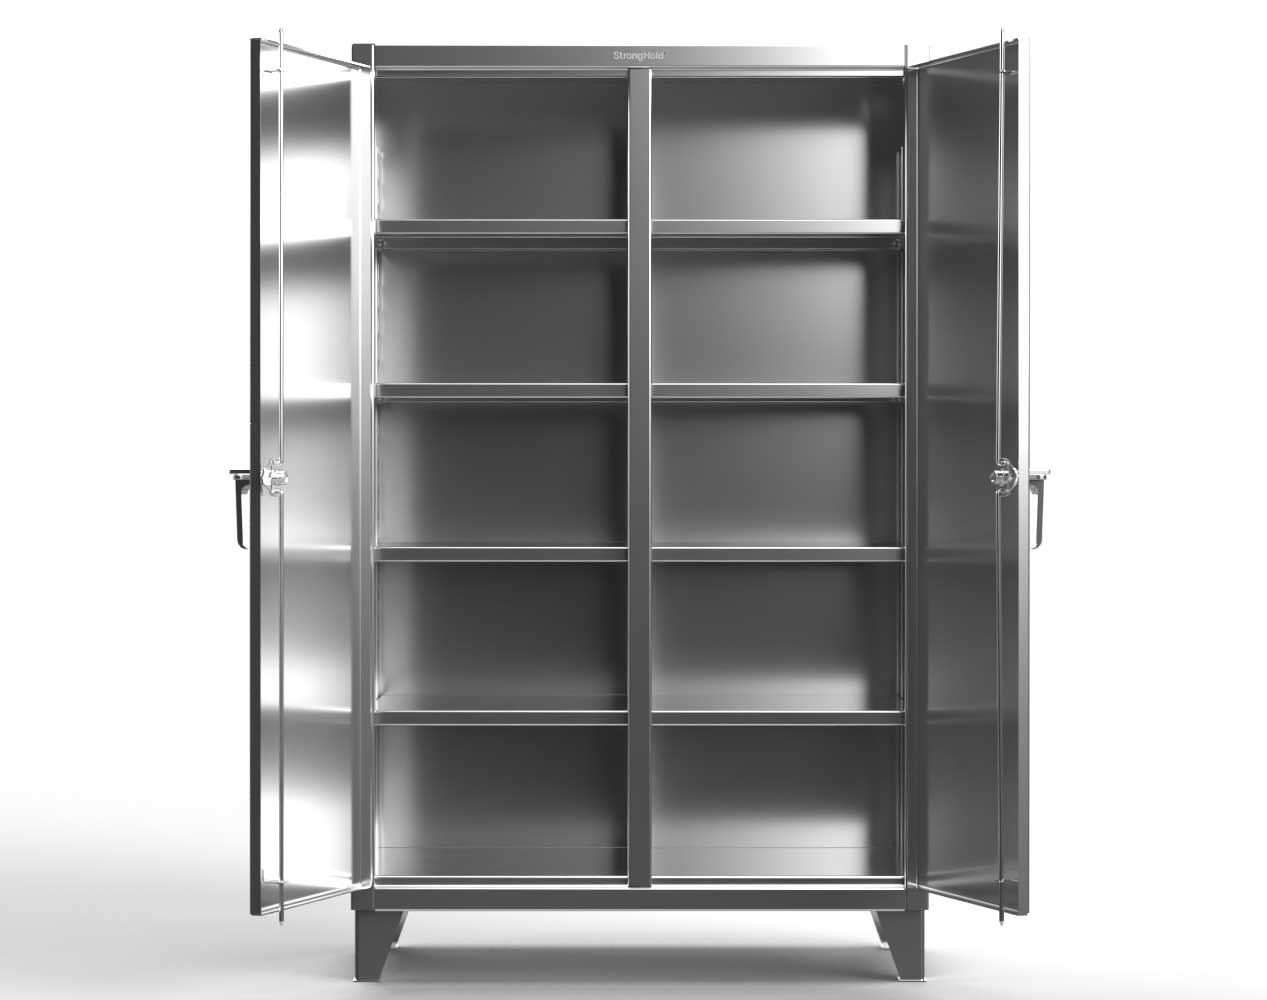 Extreme Duty 12 GA Stainless Steel Double Shift Cabinet with 8 Shelves - 48 In. W x 24 In. D x 78 In. H